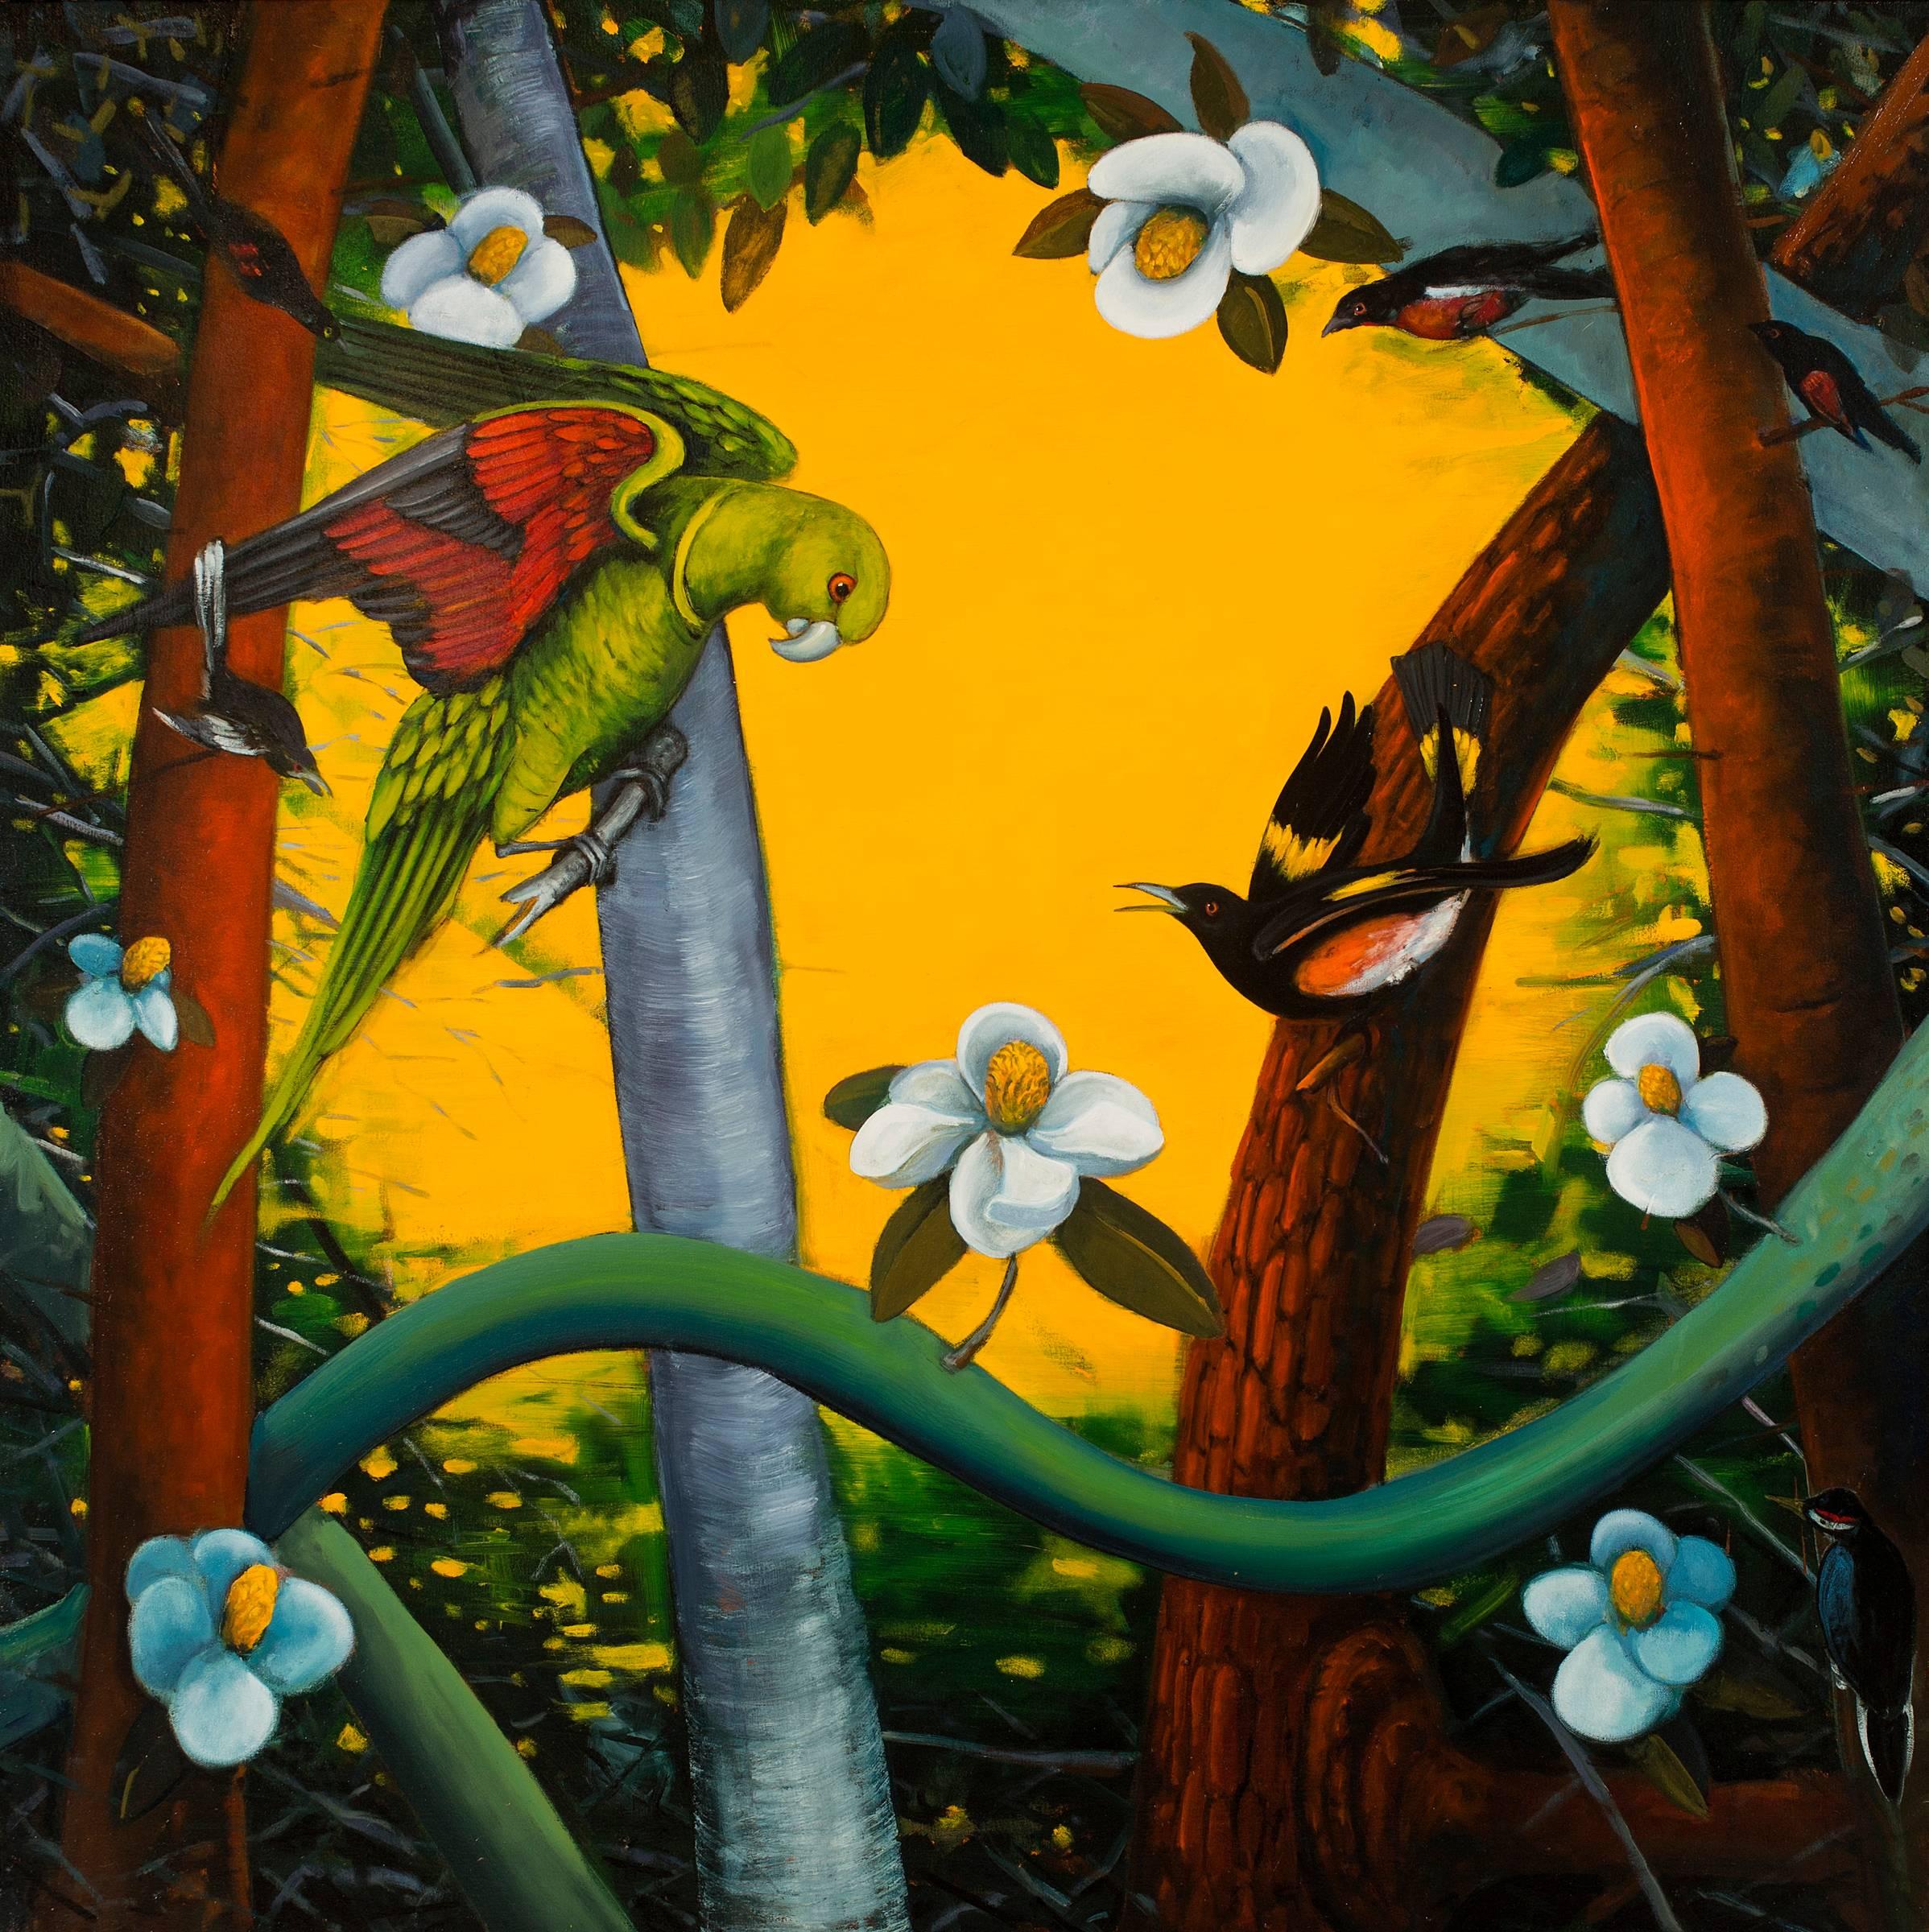 Rights of Spring, b y Ed Smith, Colorful Oil on Canvas with Birds and Flora